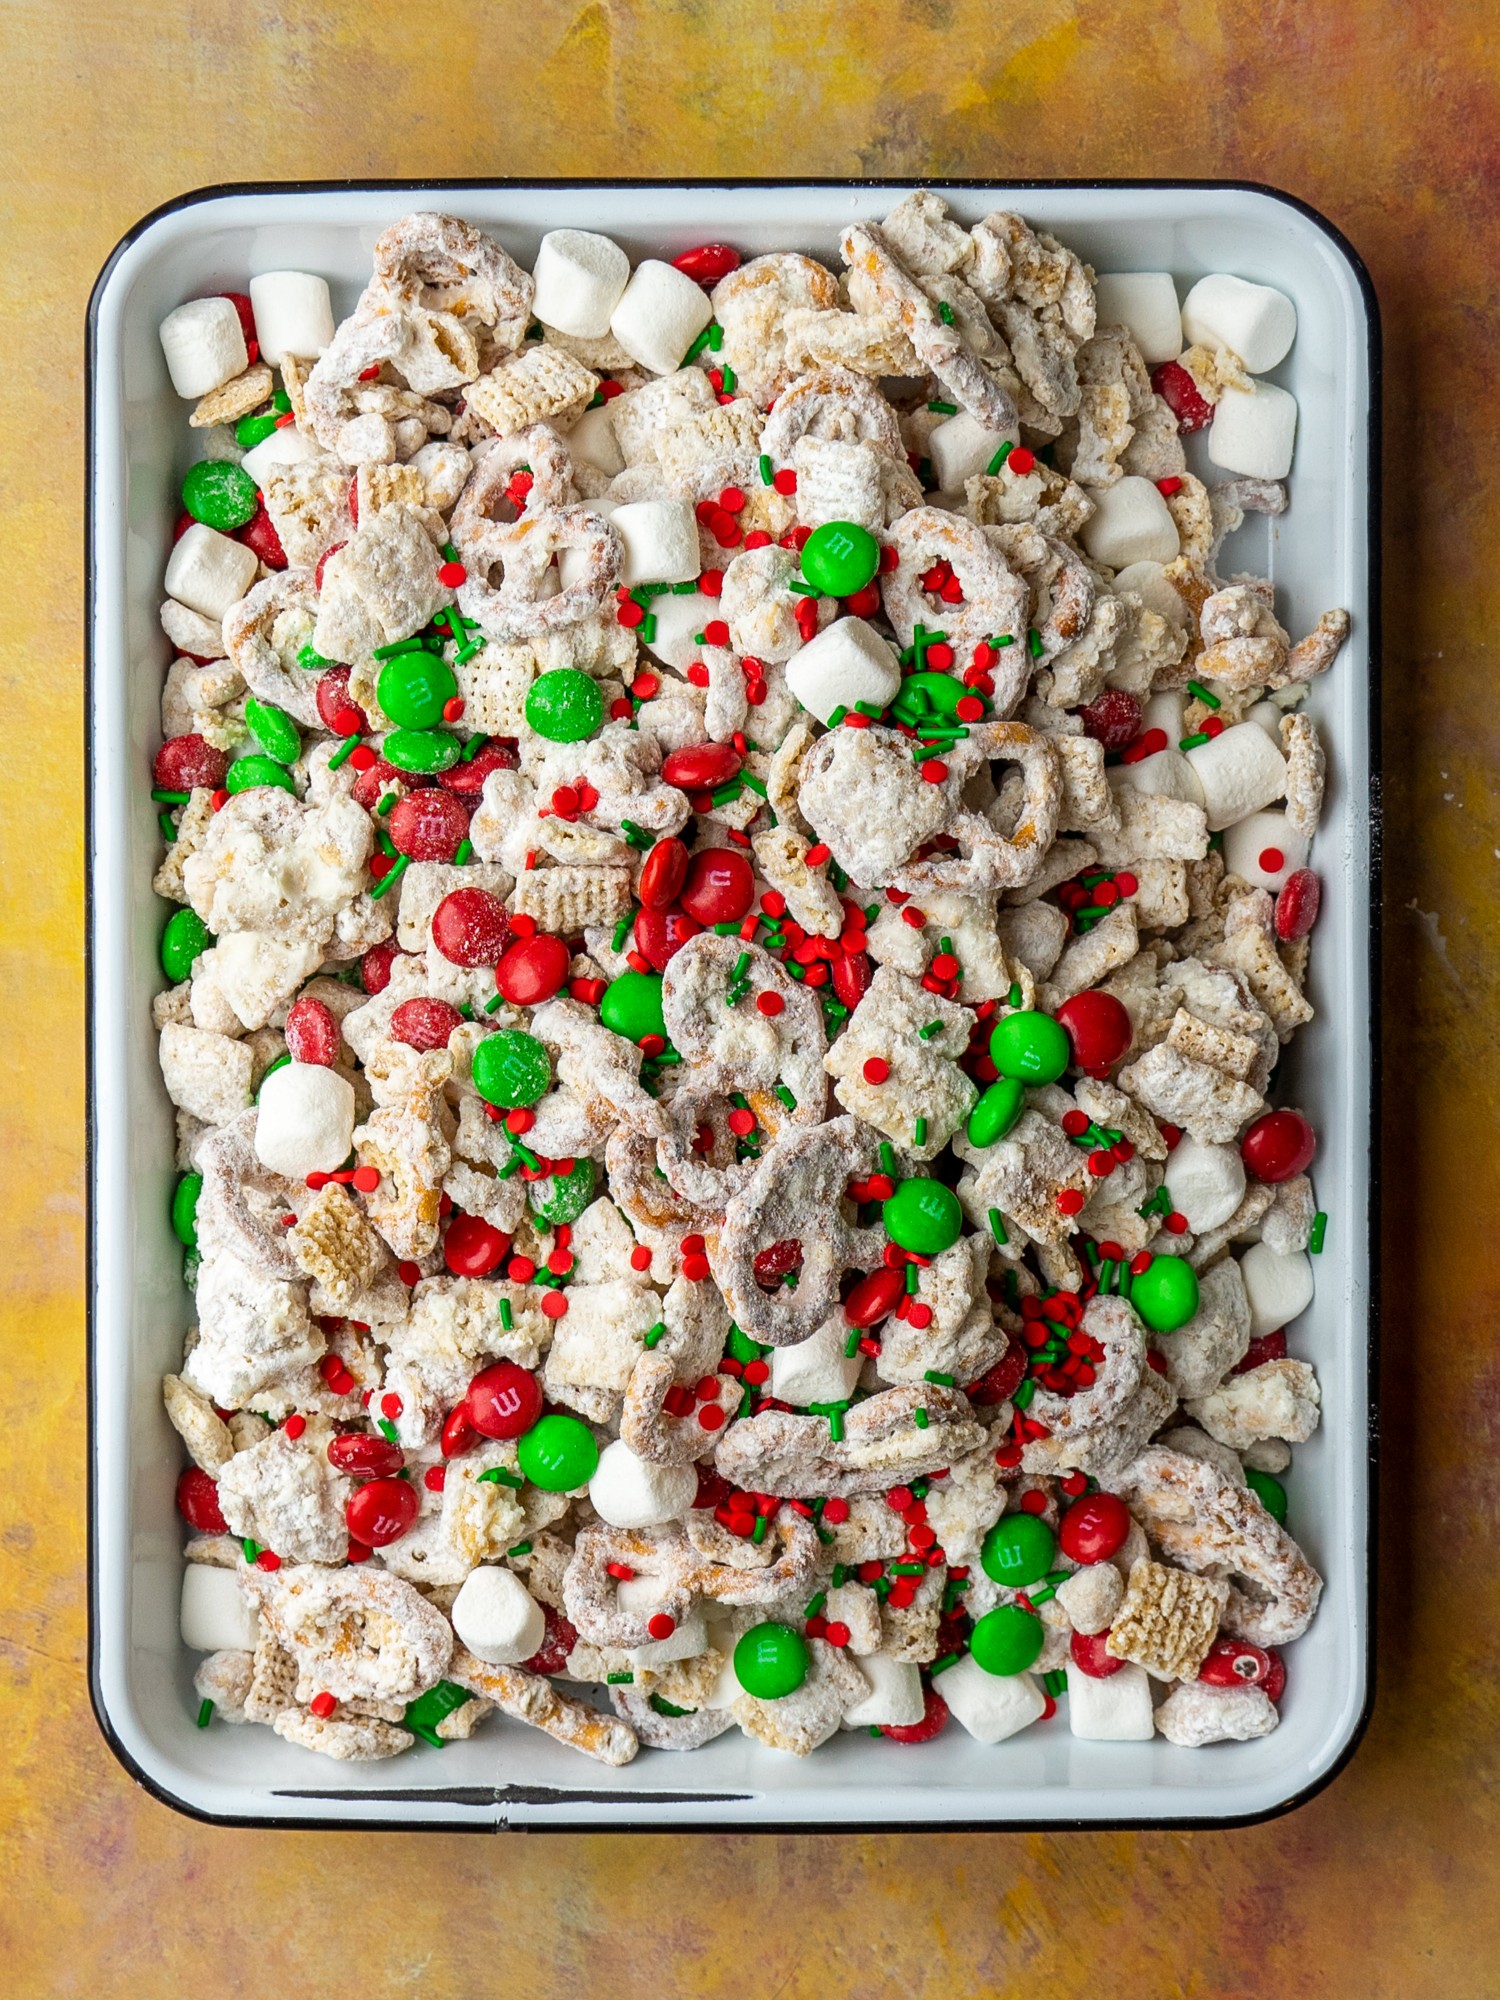 https://madaboutfood.co/wp-content/uploads/2021/10/Christmas-Chex-Mix-Recipe-with-MMs-08.jpg